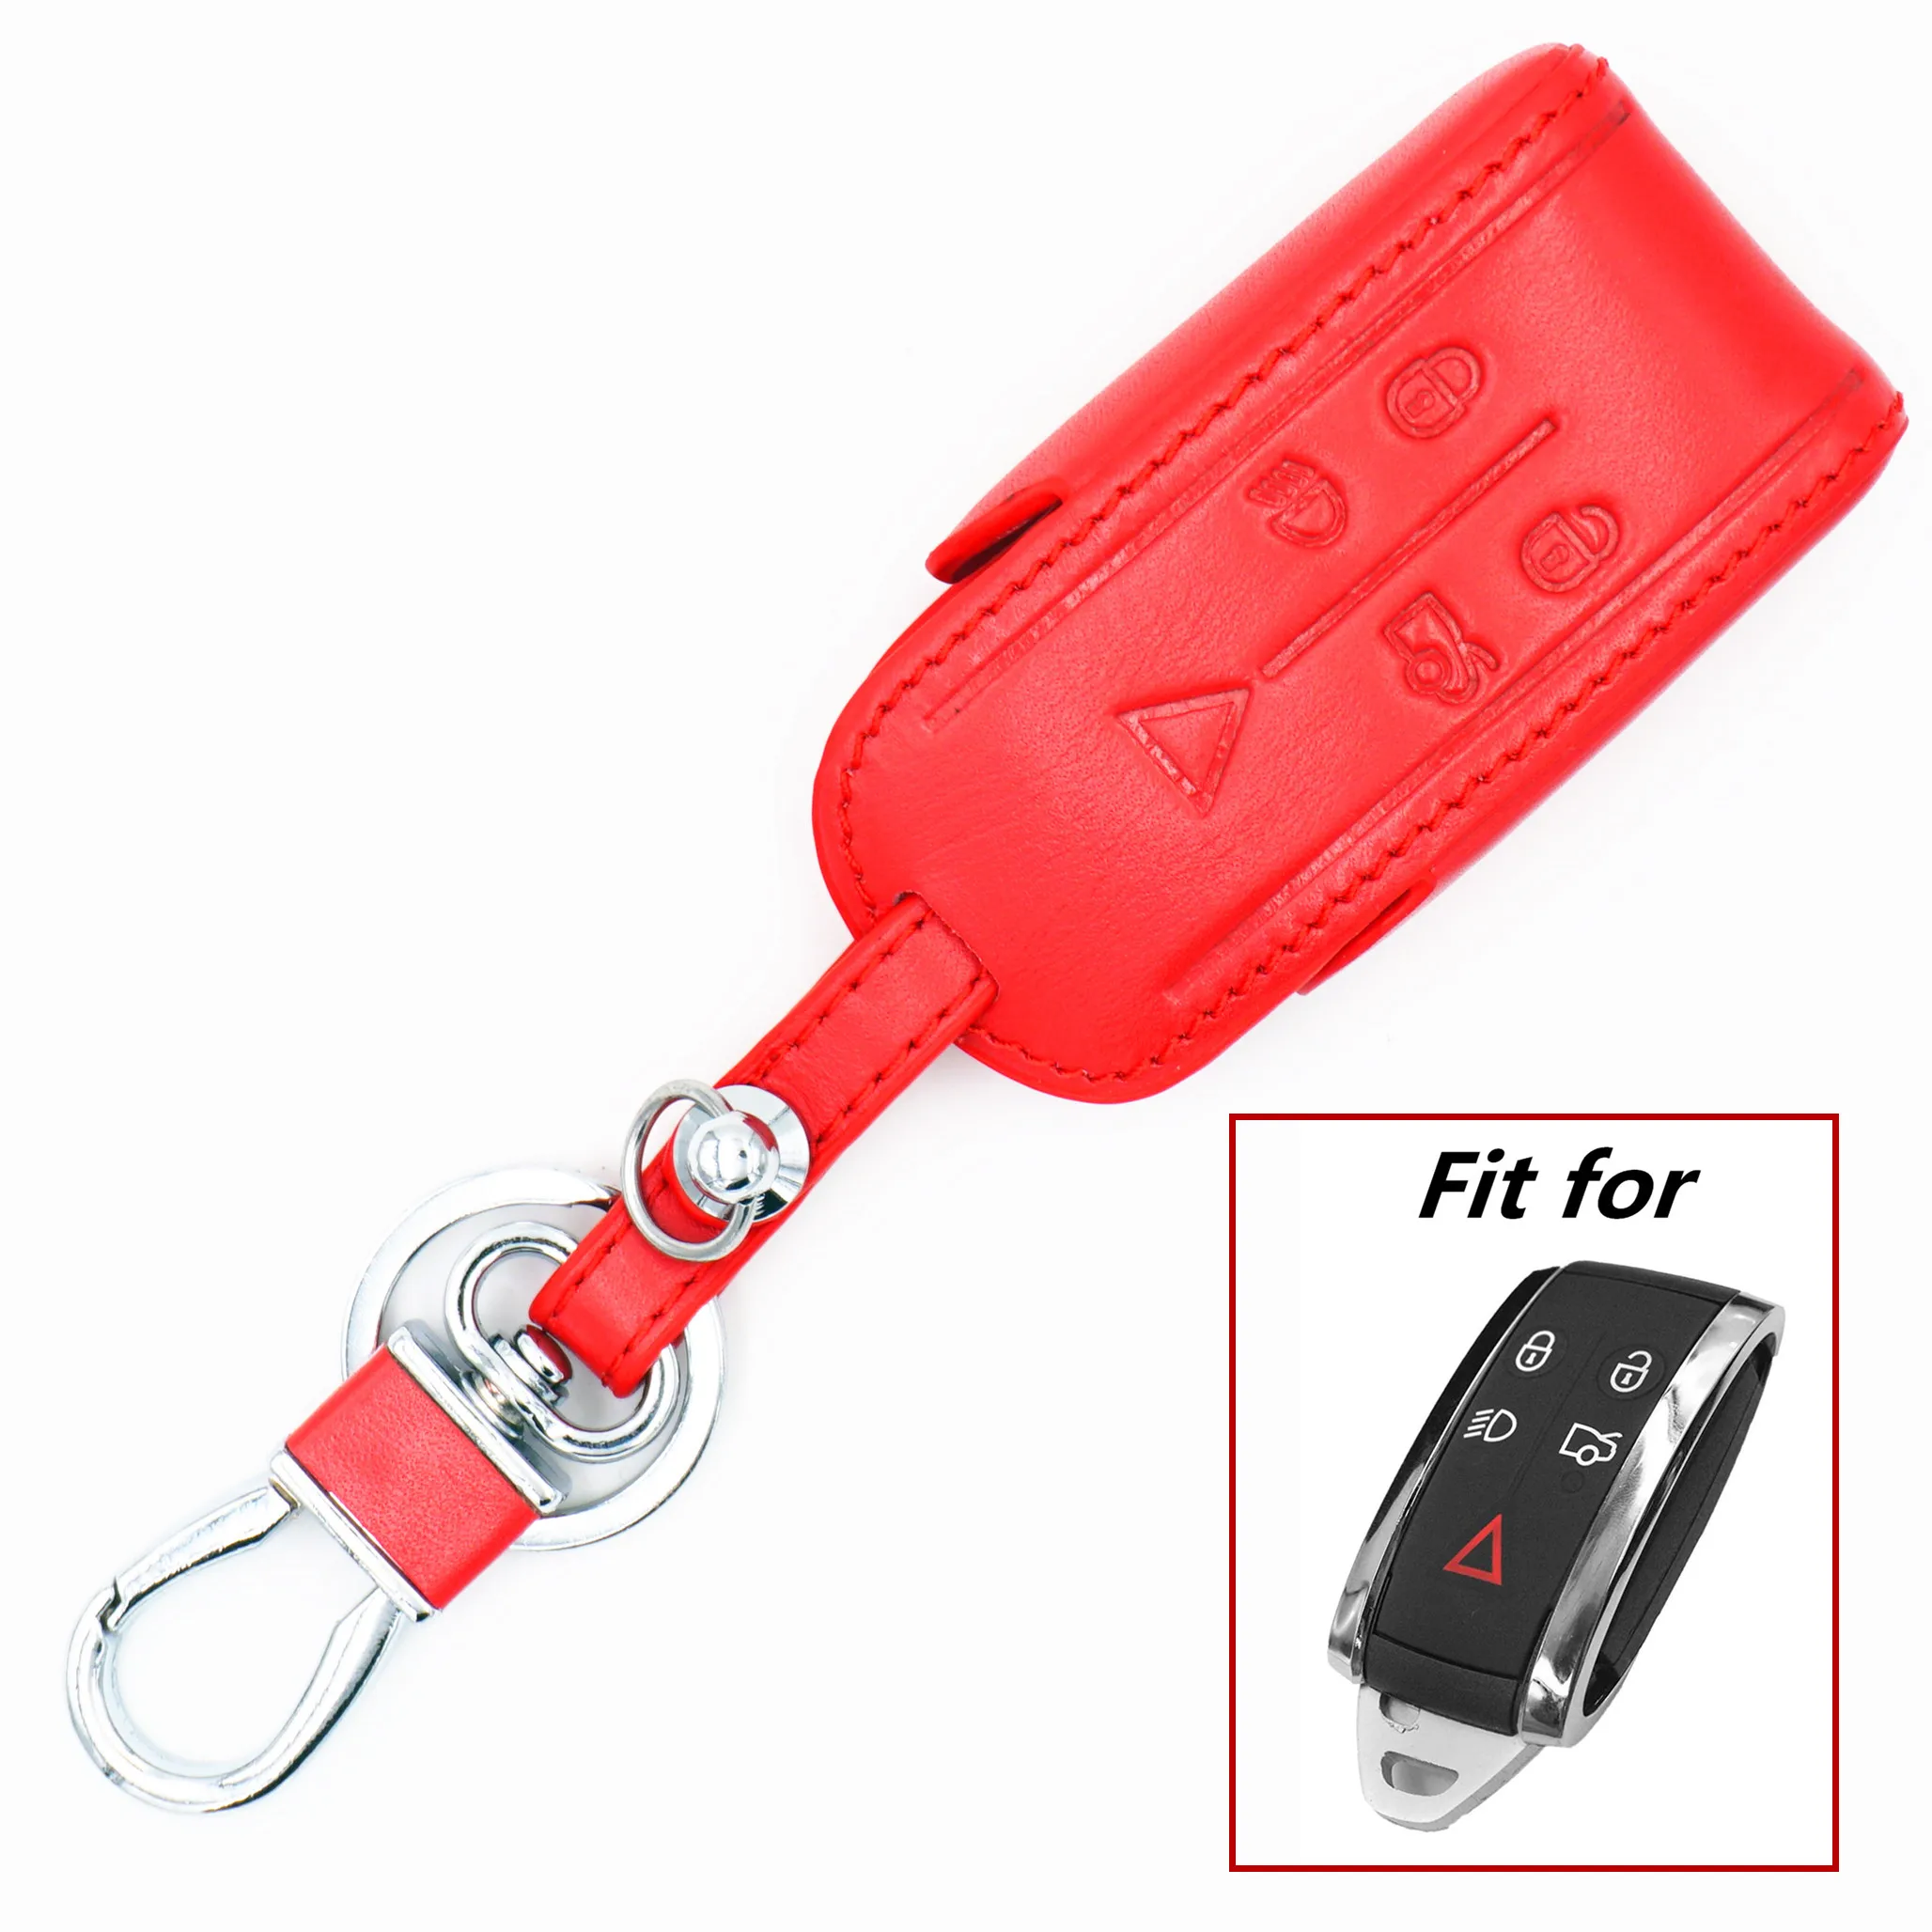 

WFMJ Red Leather 5 Buttons Remote Smart Key Chain Cover Case Fob for Jaguar XK8 S-Type Super V8 X-Type XF XFR XJ XJ8 XJR XK XKR